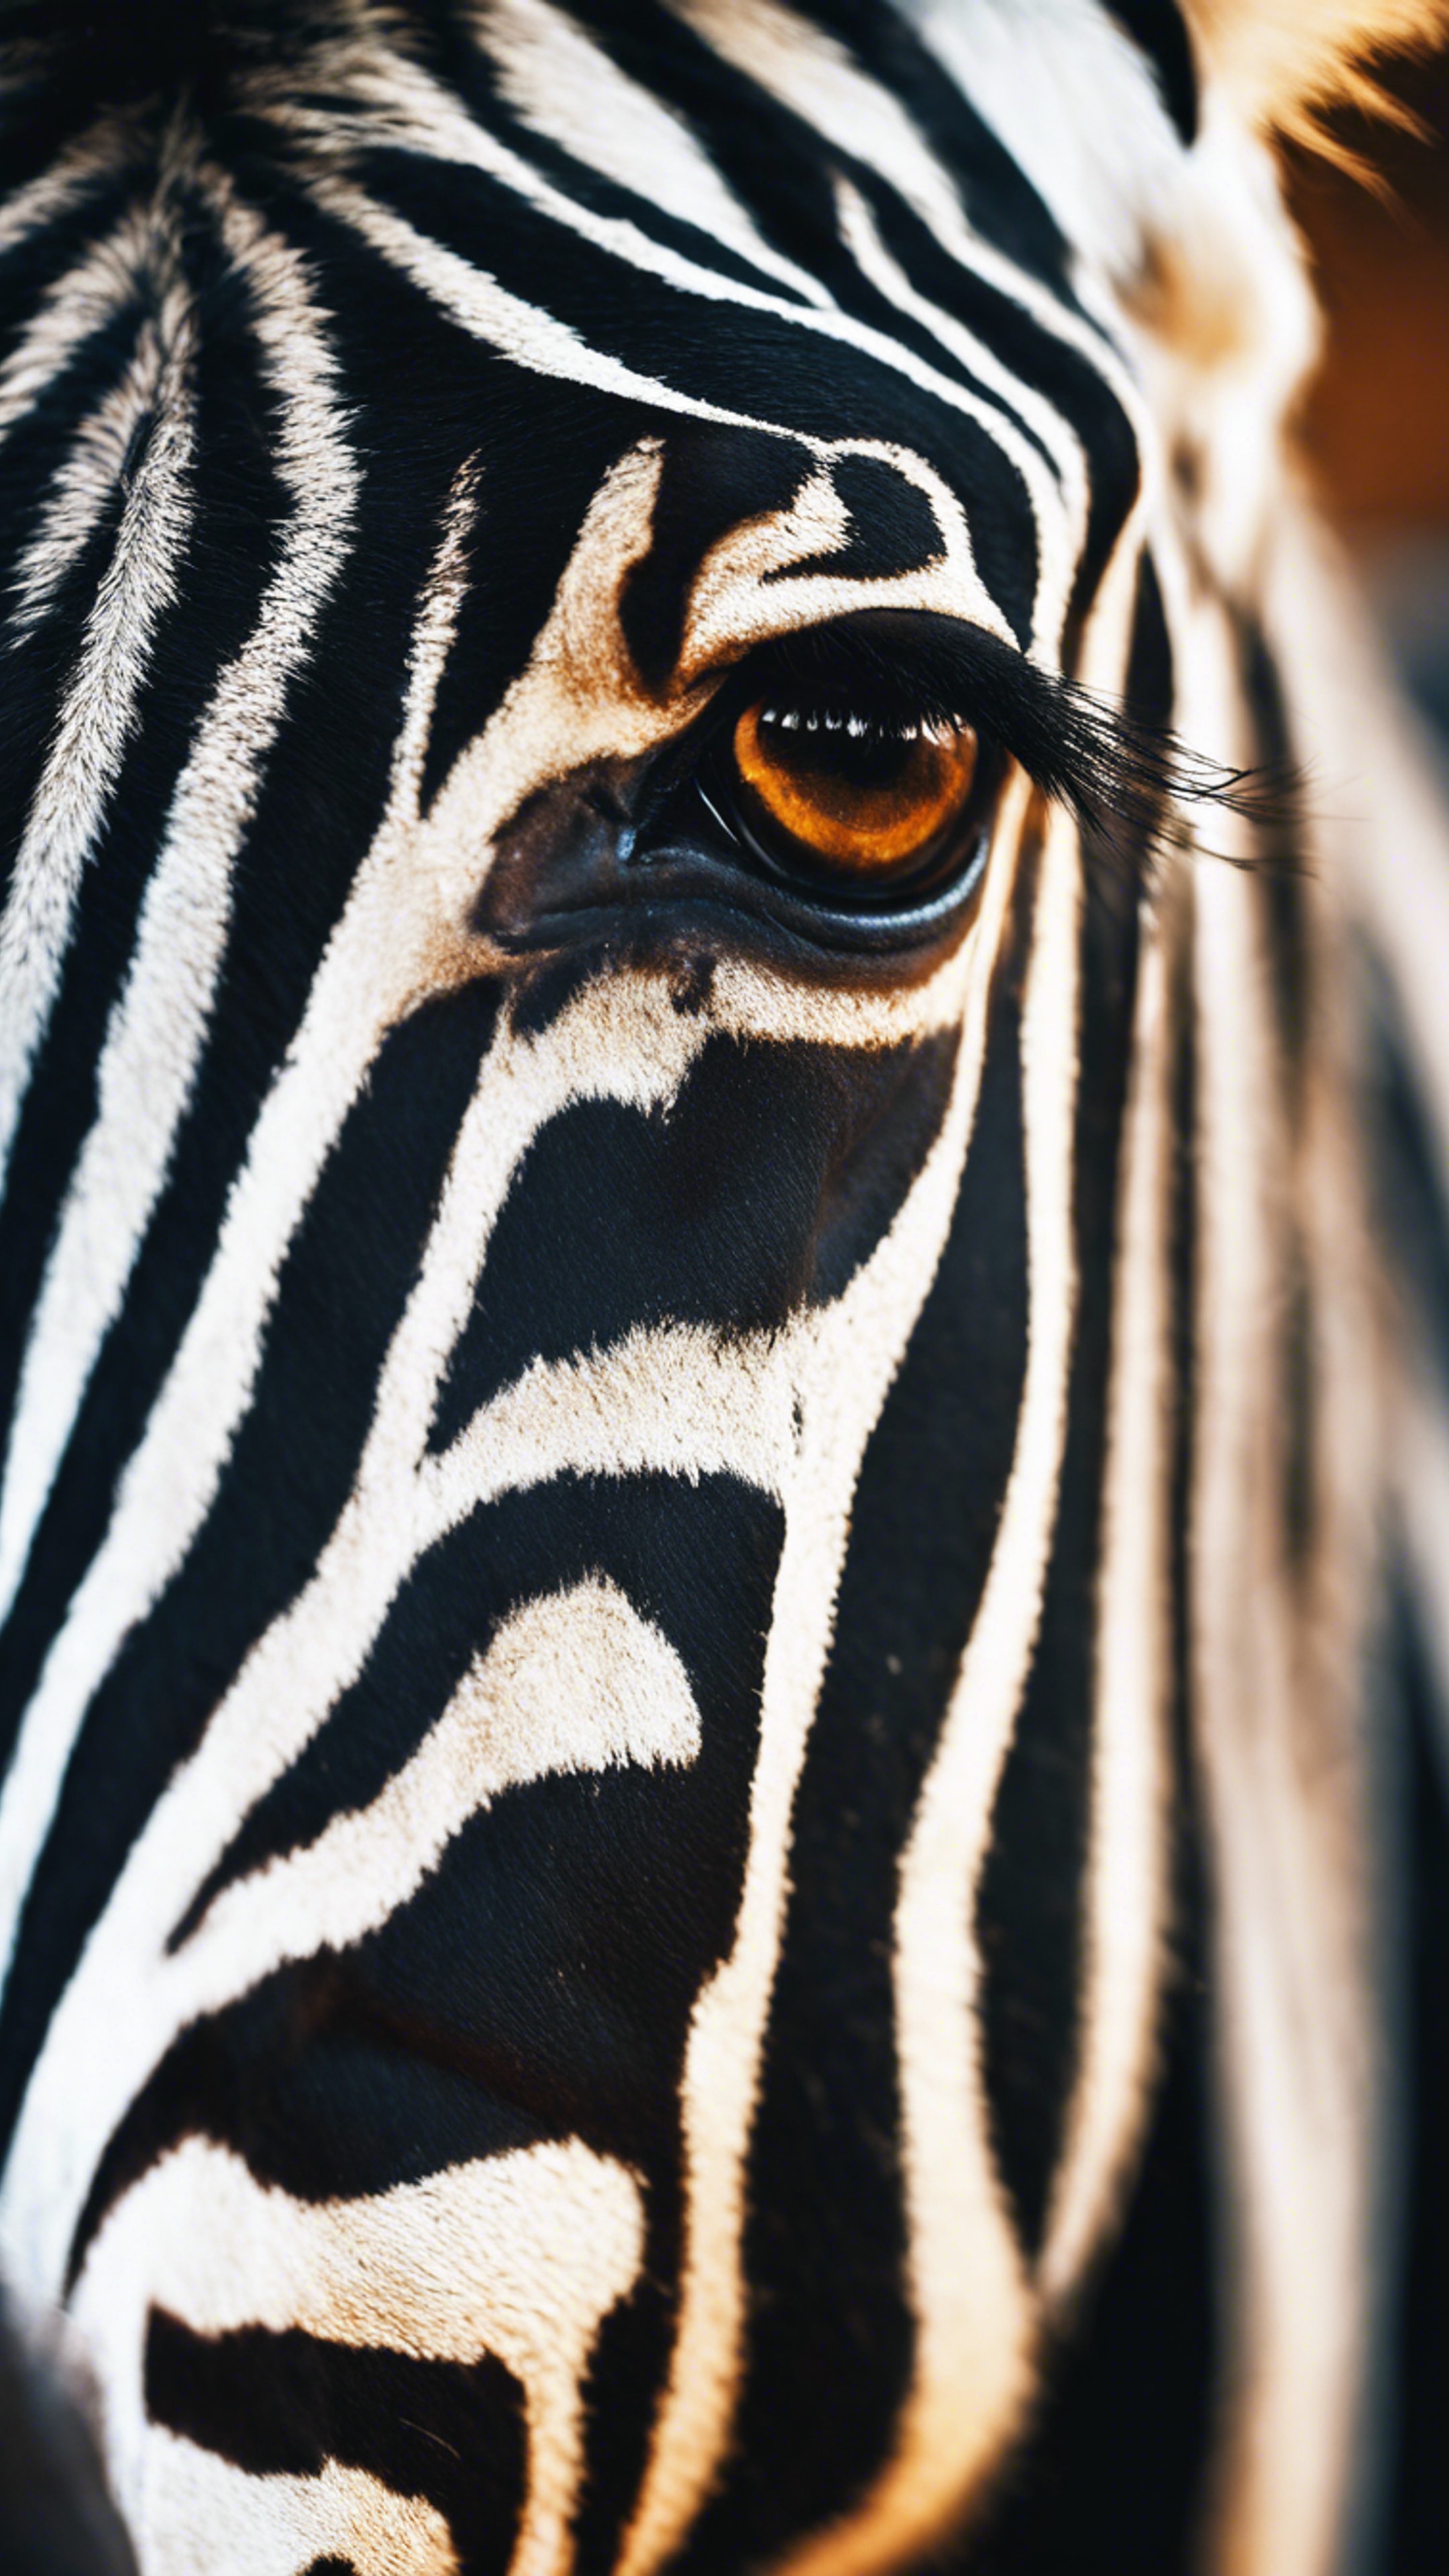 A close-up shot of a zebra's eye expressing strong emotions. Hintergrund[ea30c6a0b471421fa723]